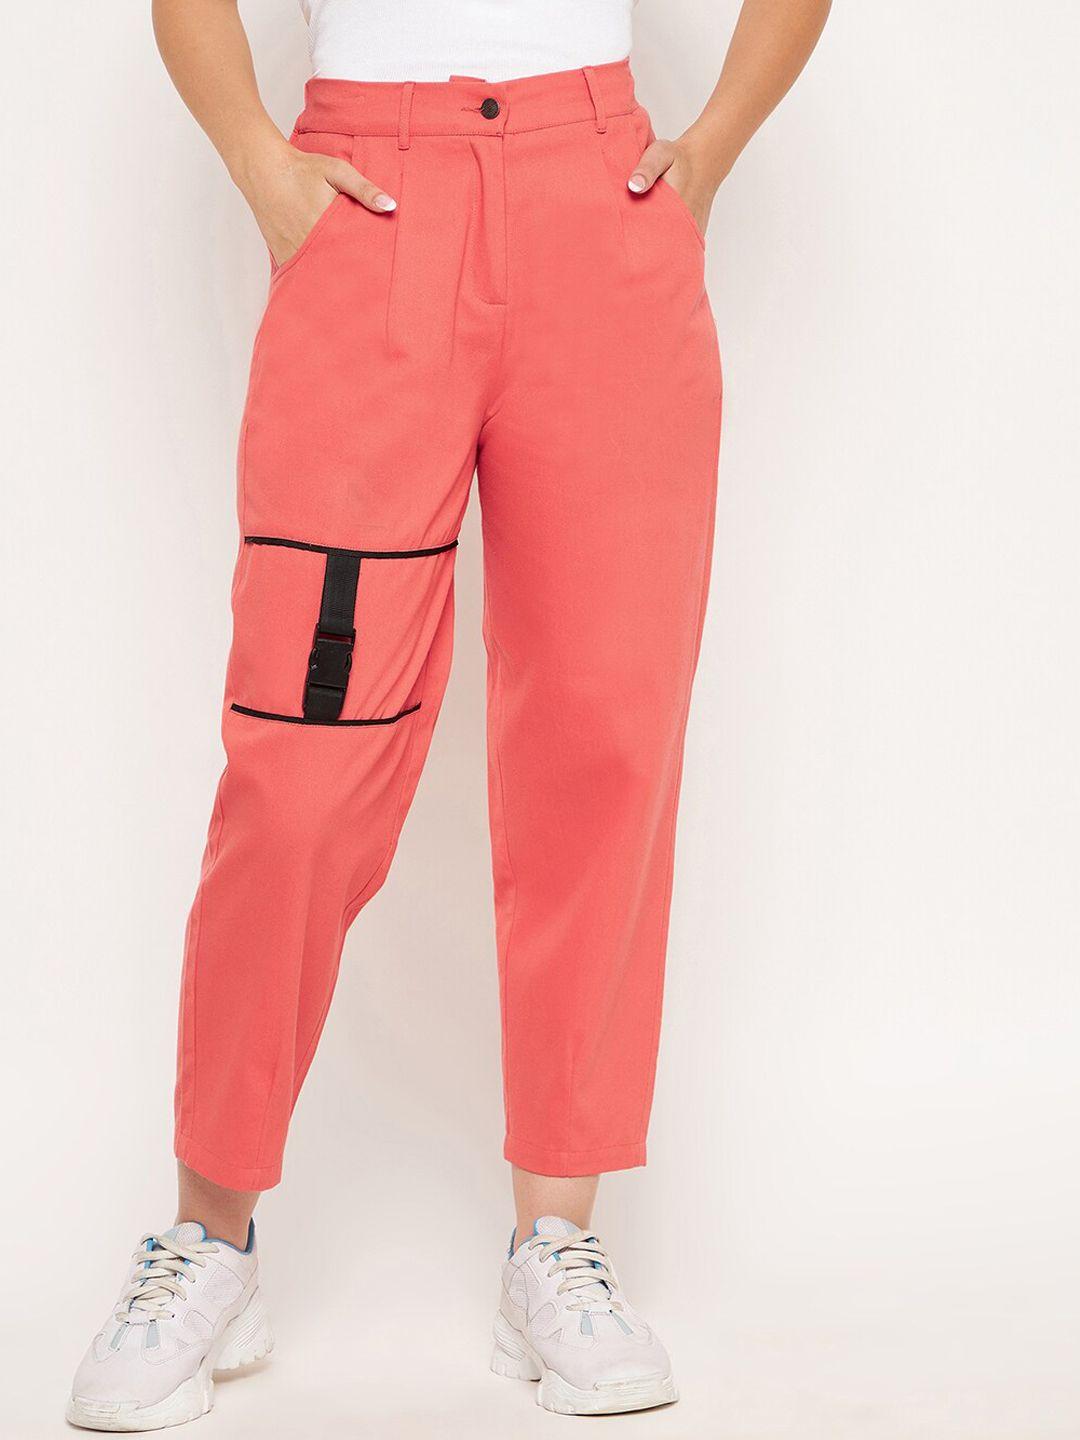 winered-women-peach-coloured-smart-high-rise-easy-wash-pleated-trouser-with-buckle